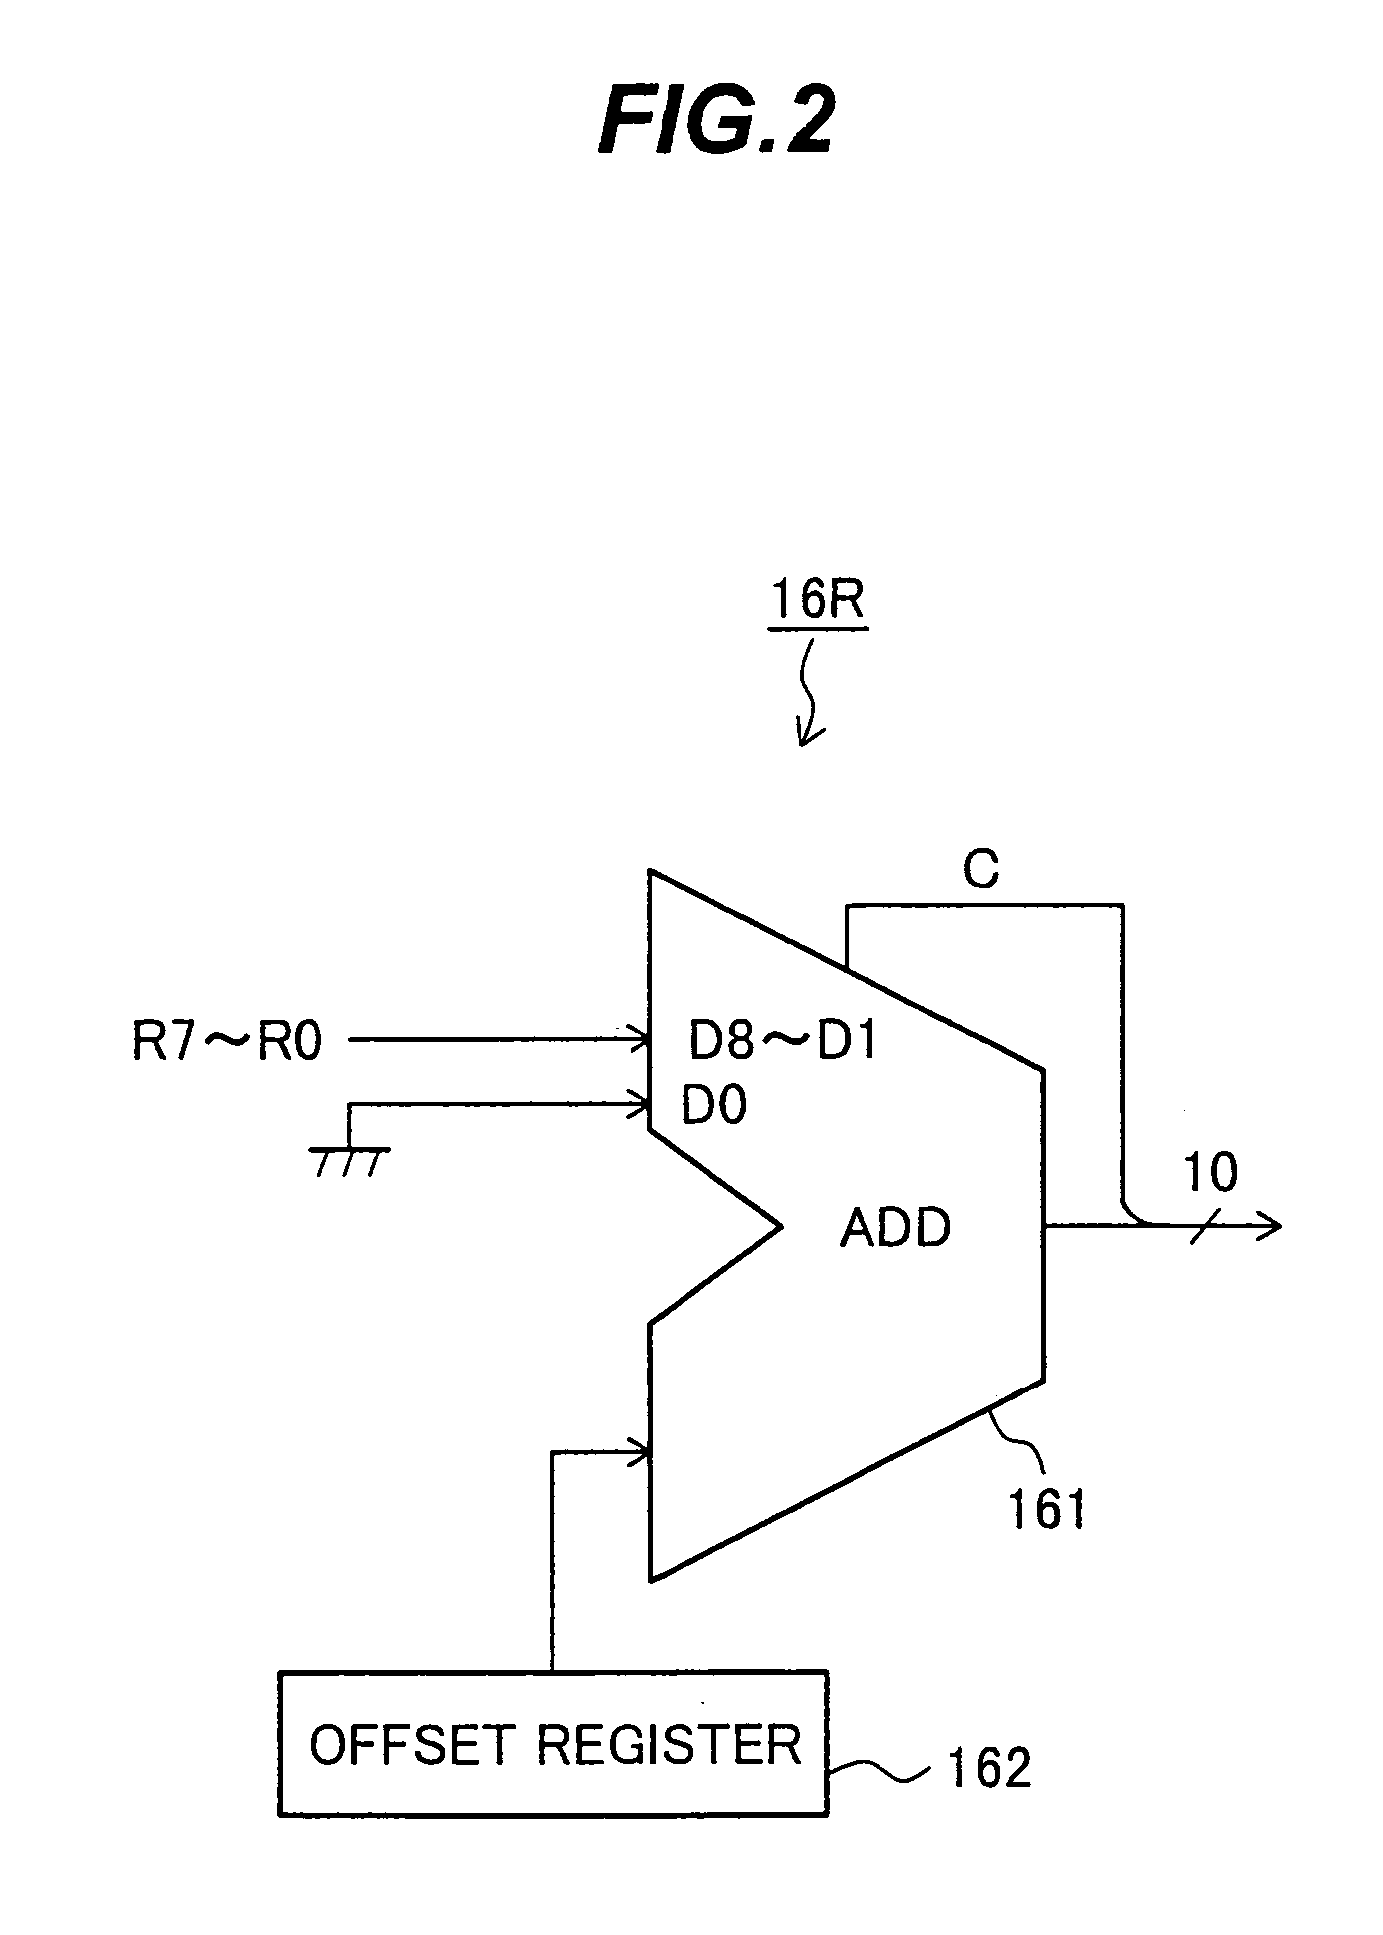 Image processor capable of edge enhancement in saturated region